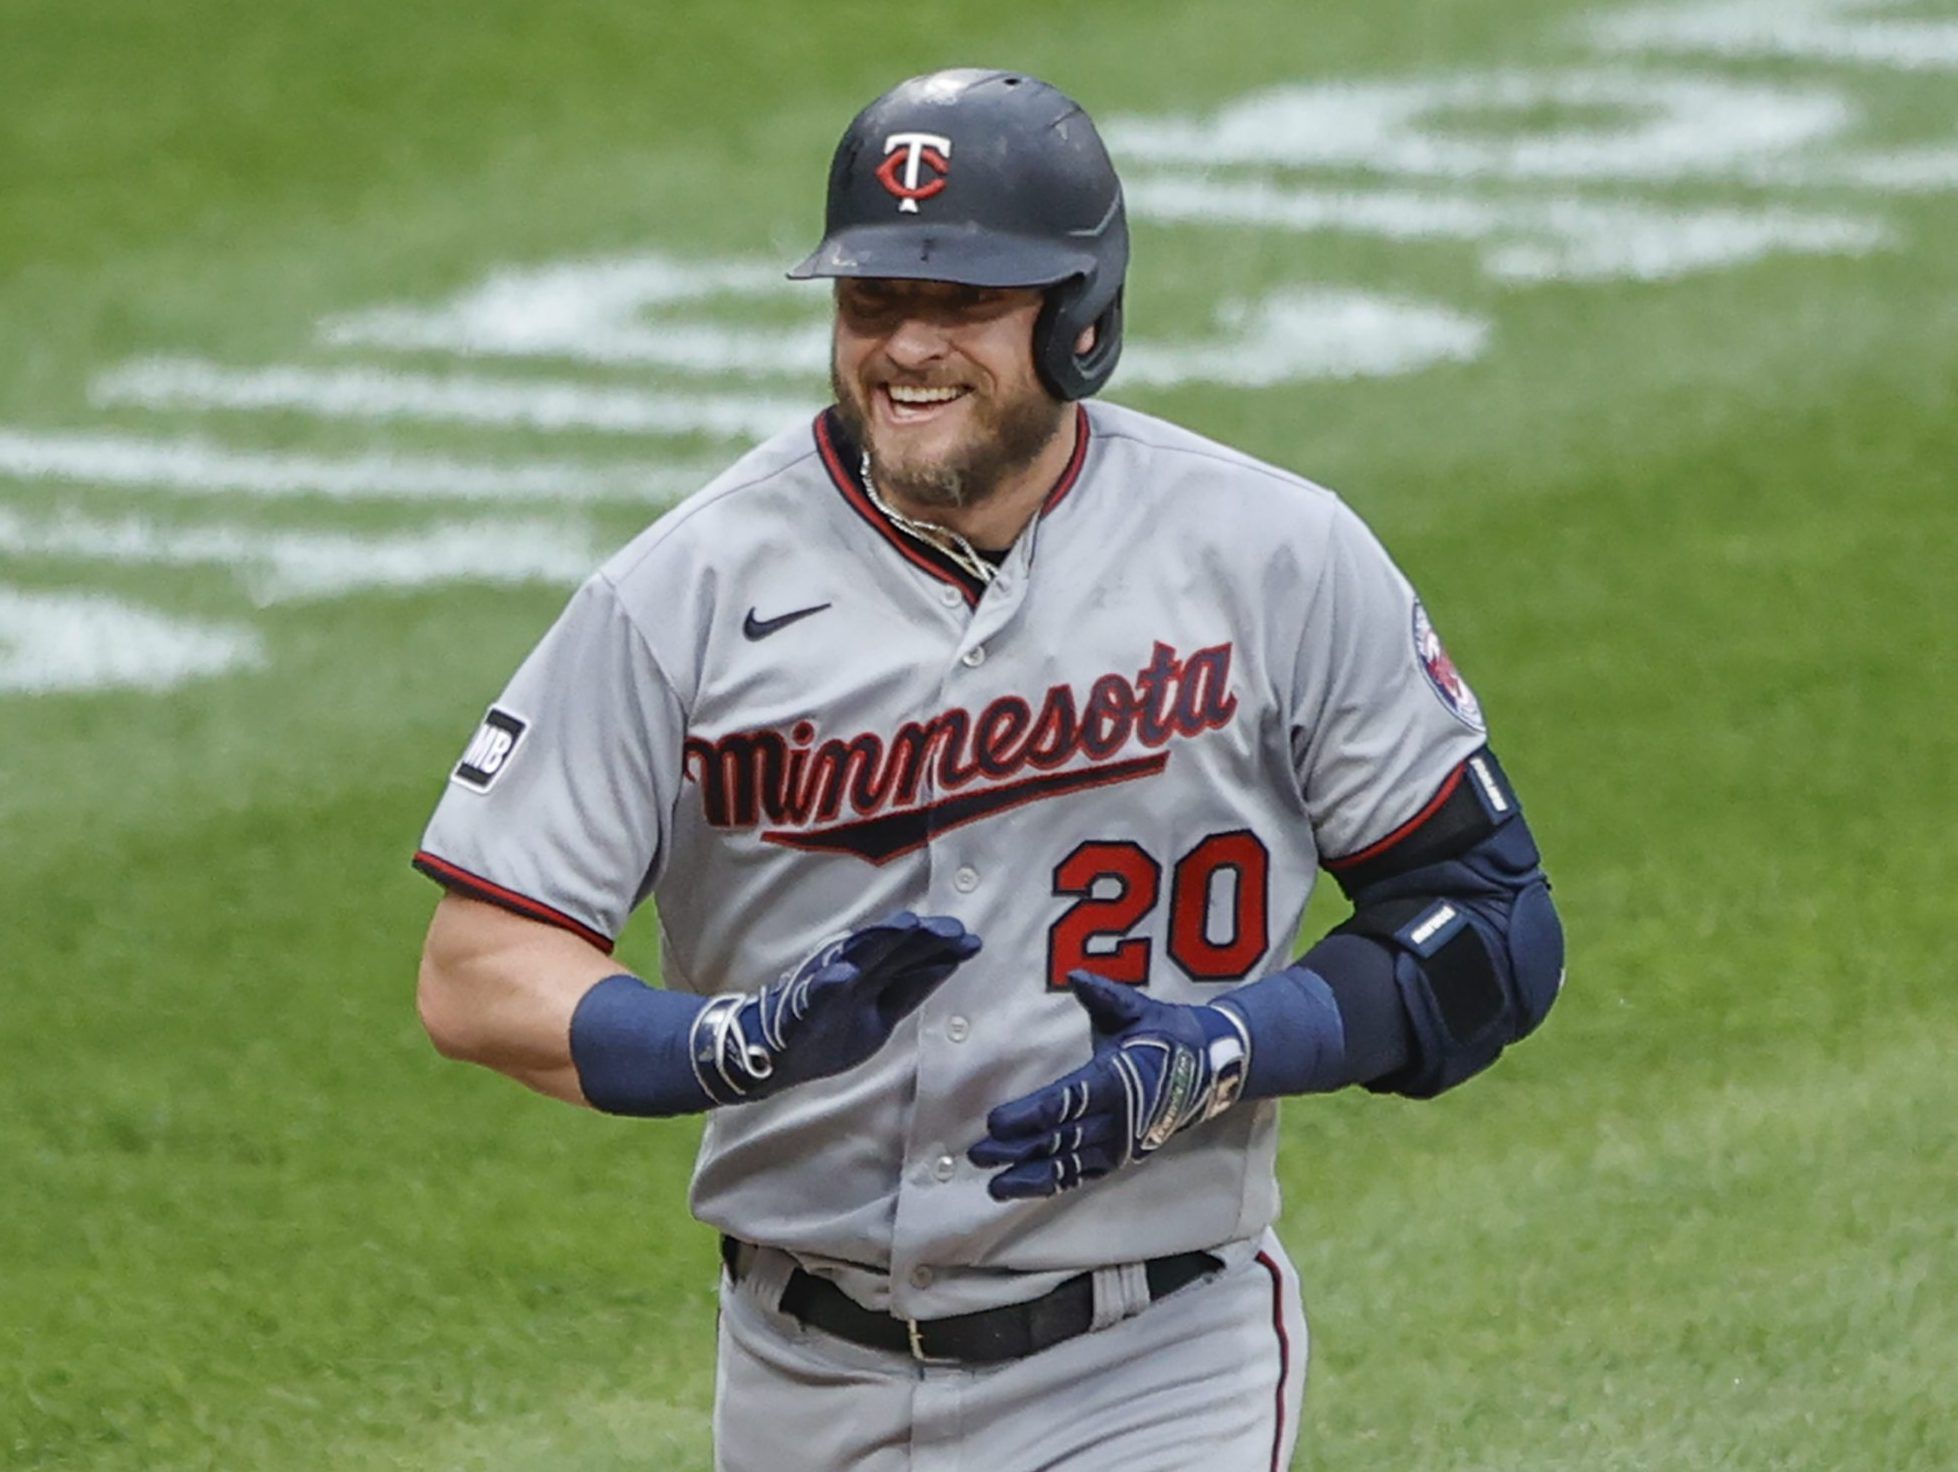 Yankees acquire Josh Donaldson from Twins, per report - MLB Daily Dish